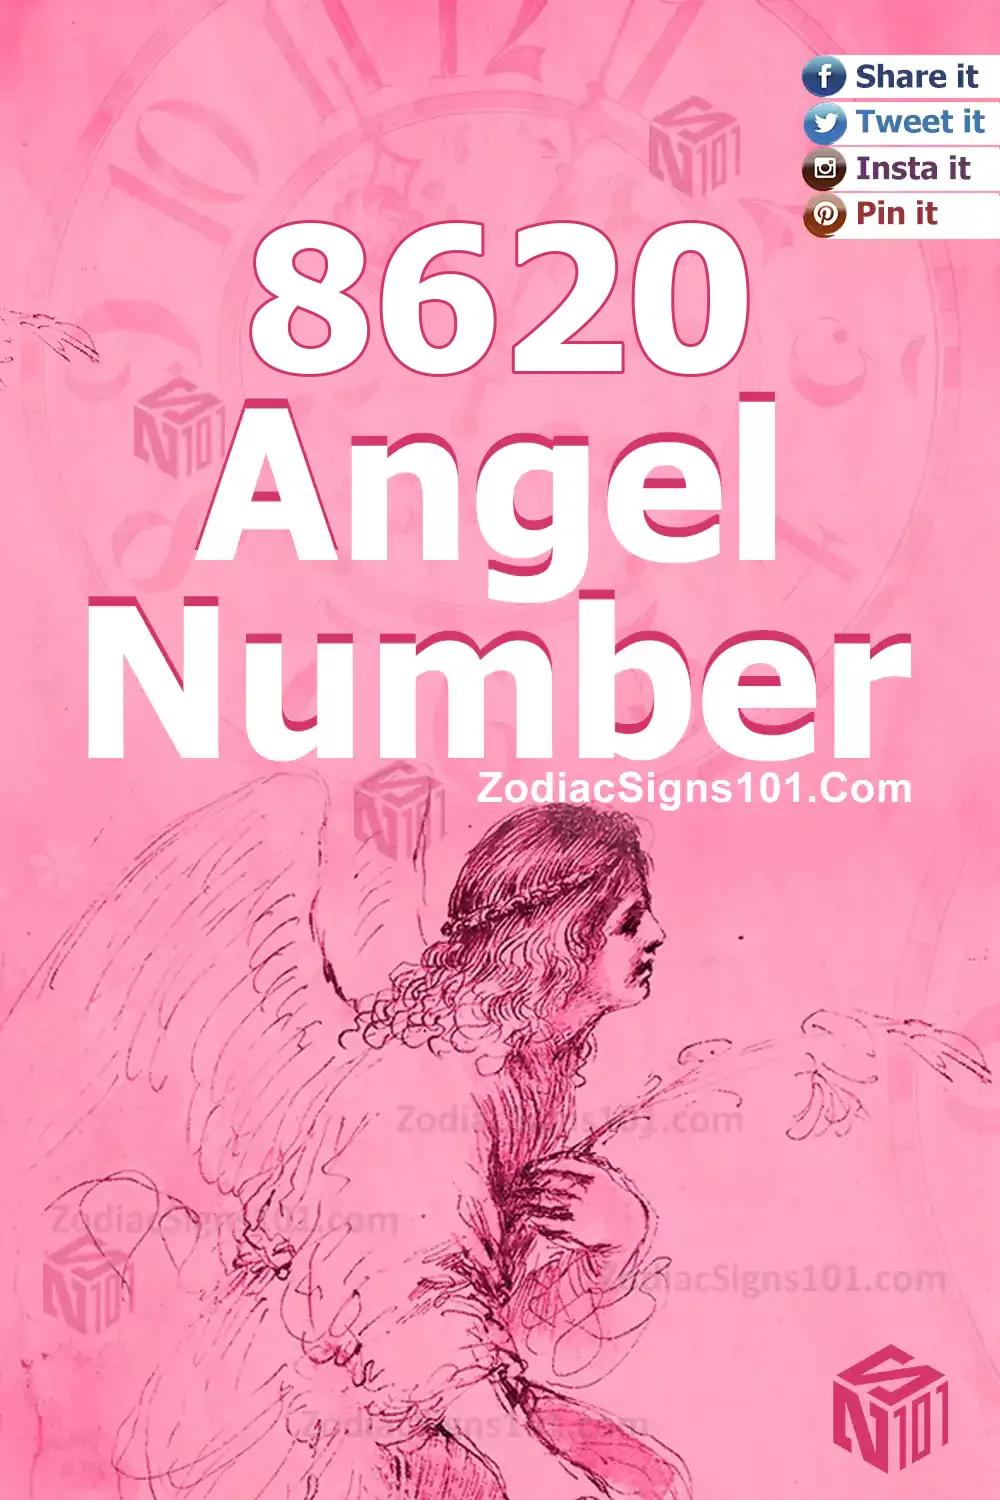 8620 Angel Number Meaning